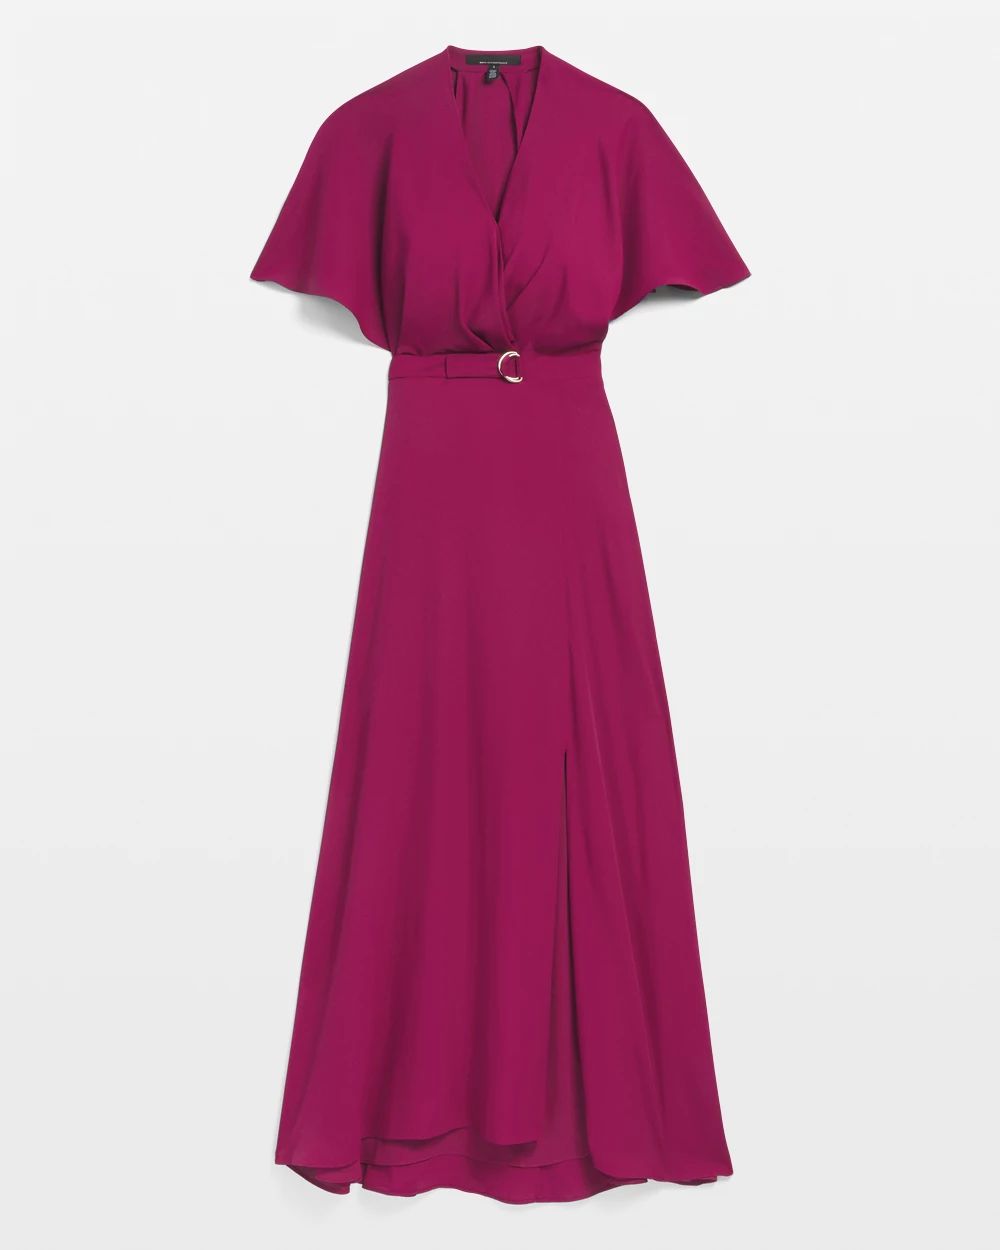 Petite Cape Belted Maxi With Slit Dress click to view larger image.